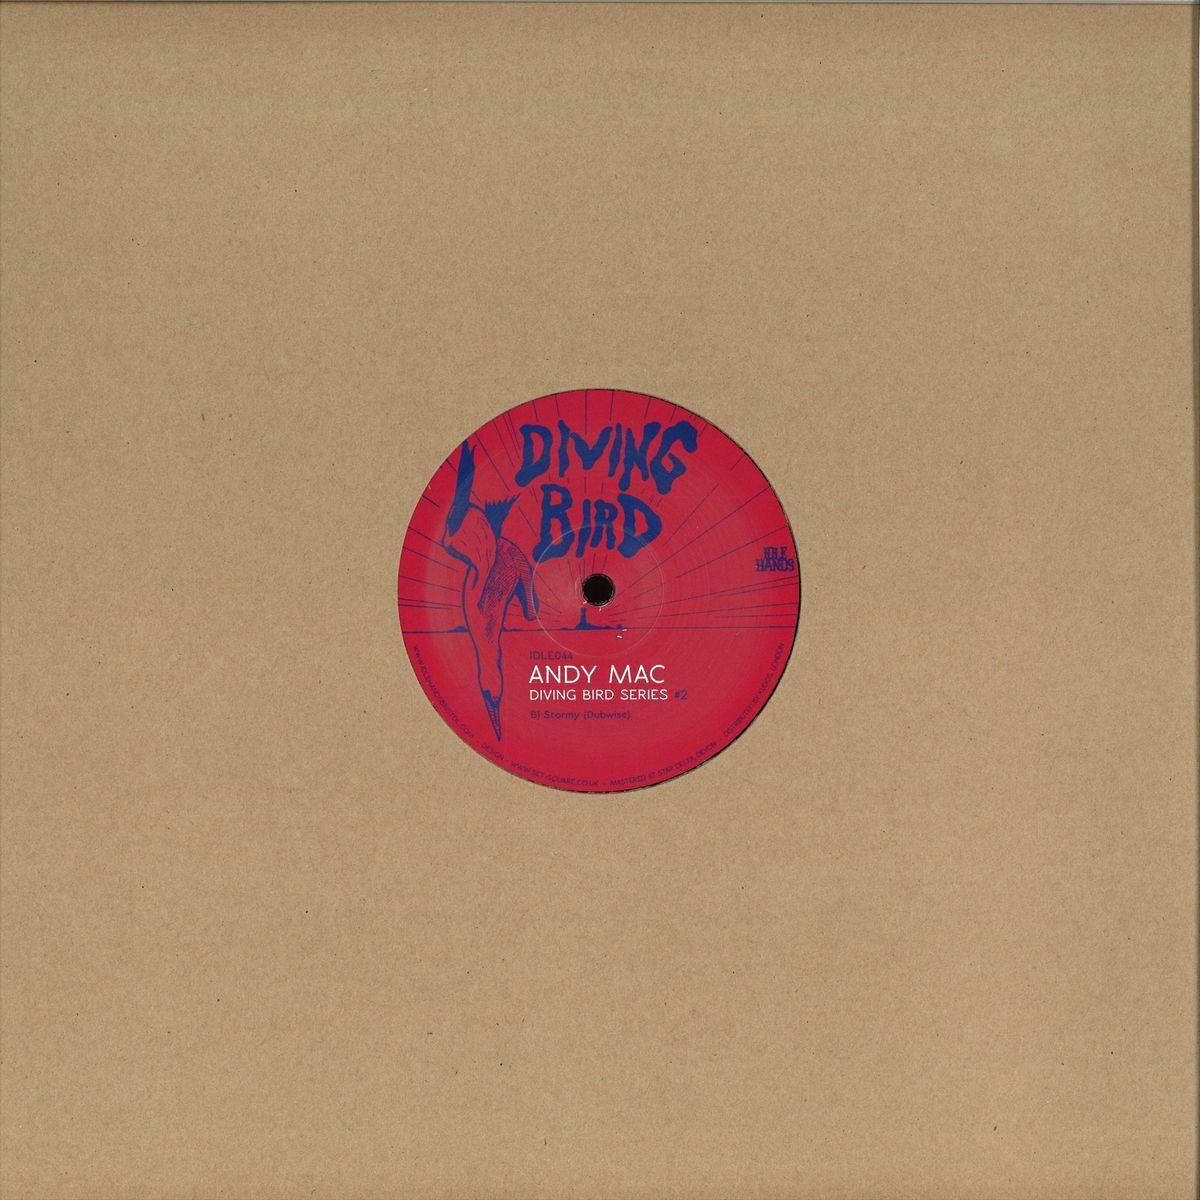 Diving Bird in Circle Logo - Andy Mac - Diving Bird 2 / Idle Hands IDLE044 - Vinyl